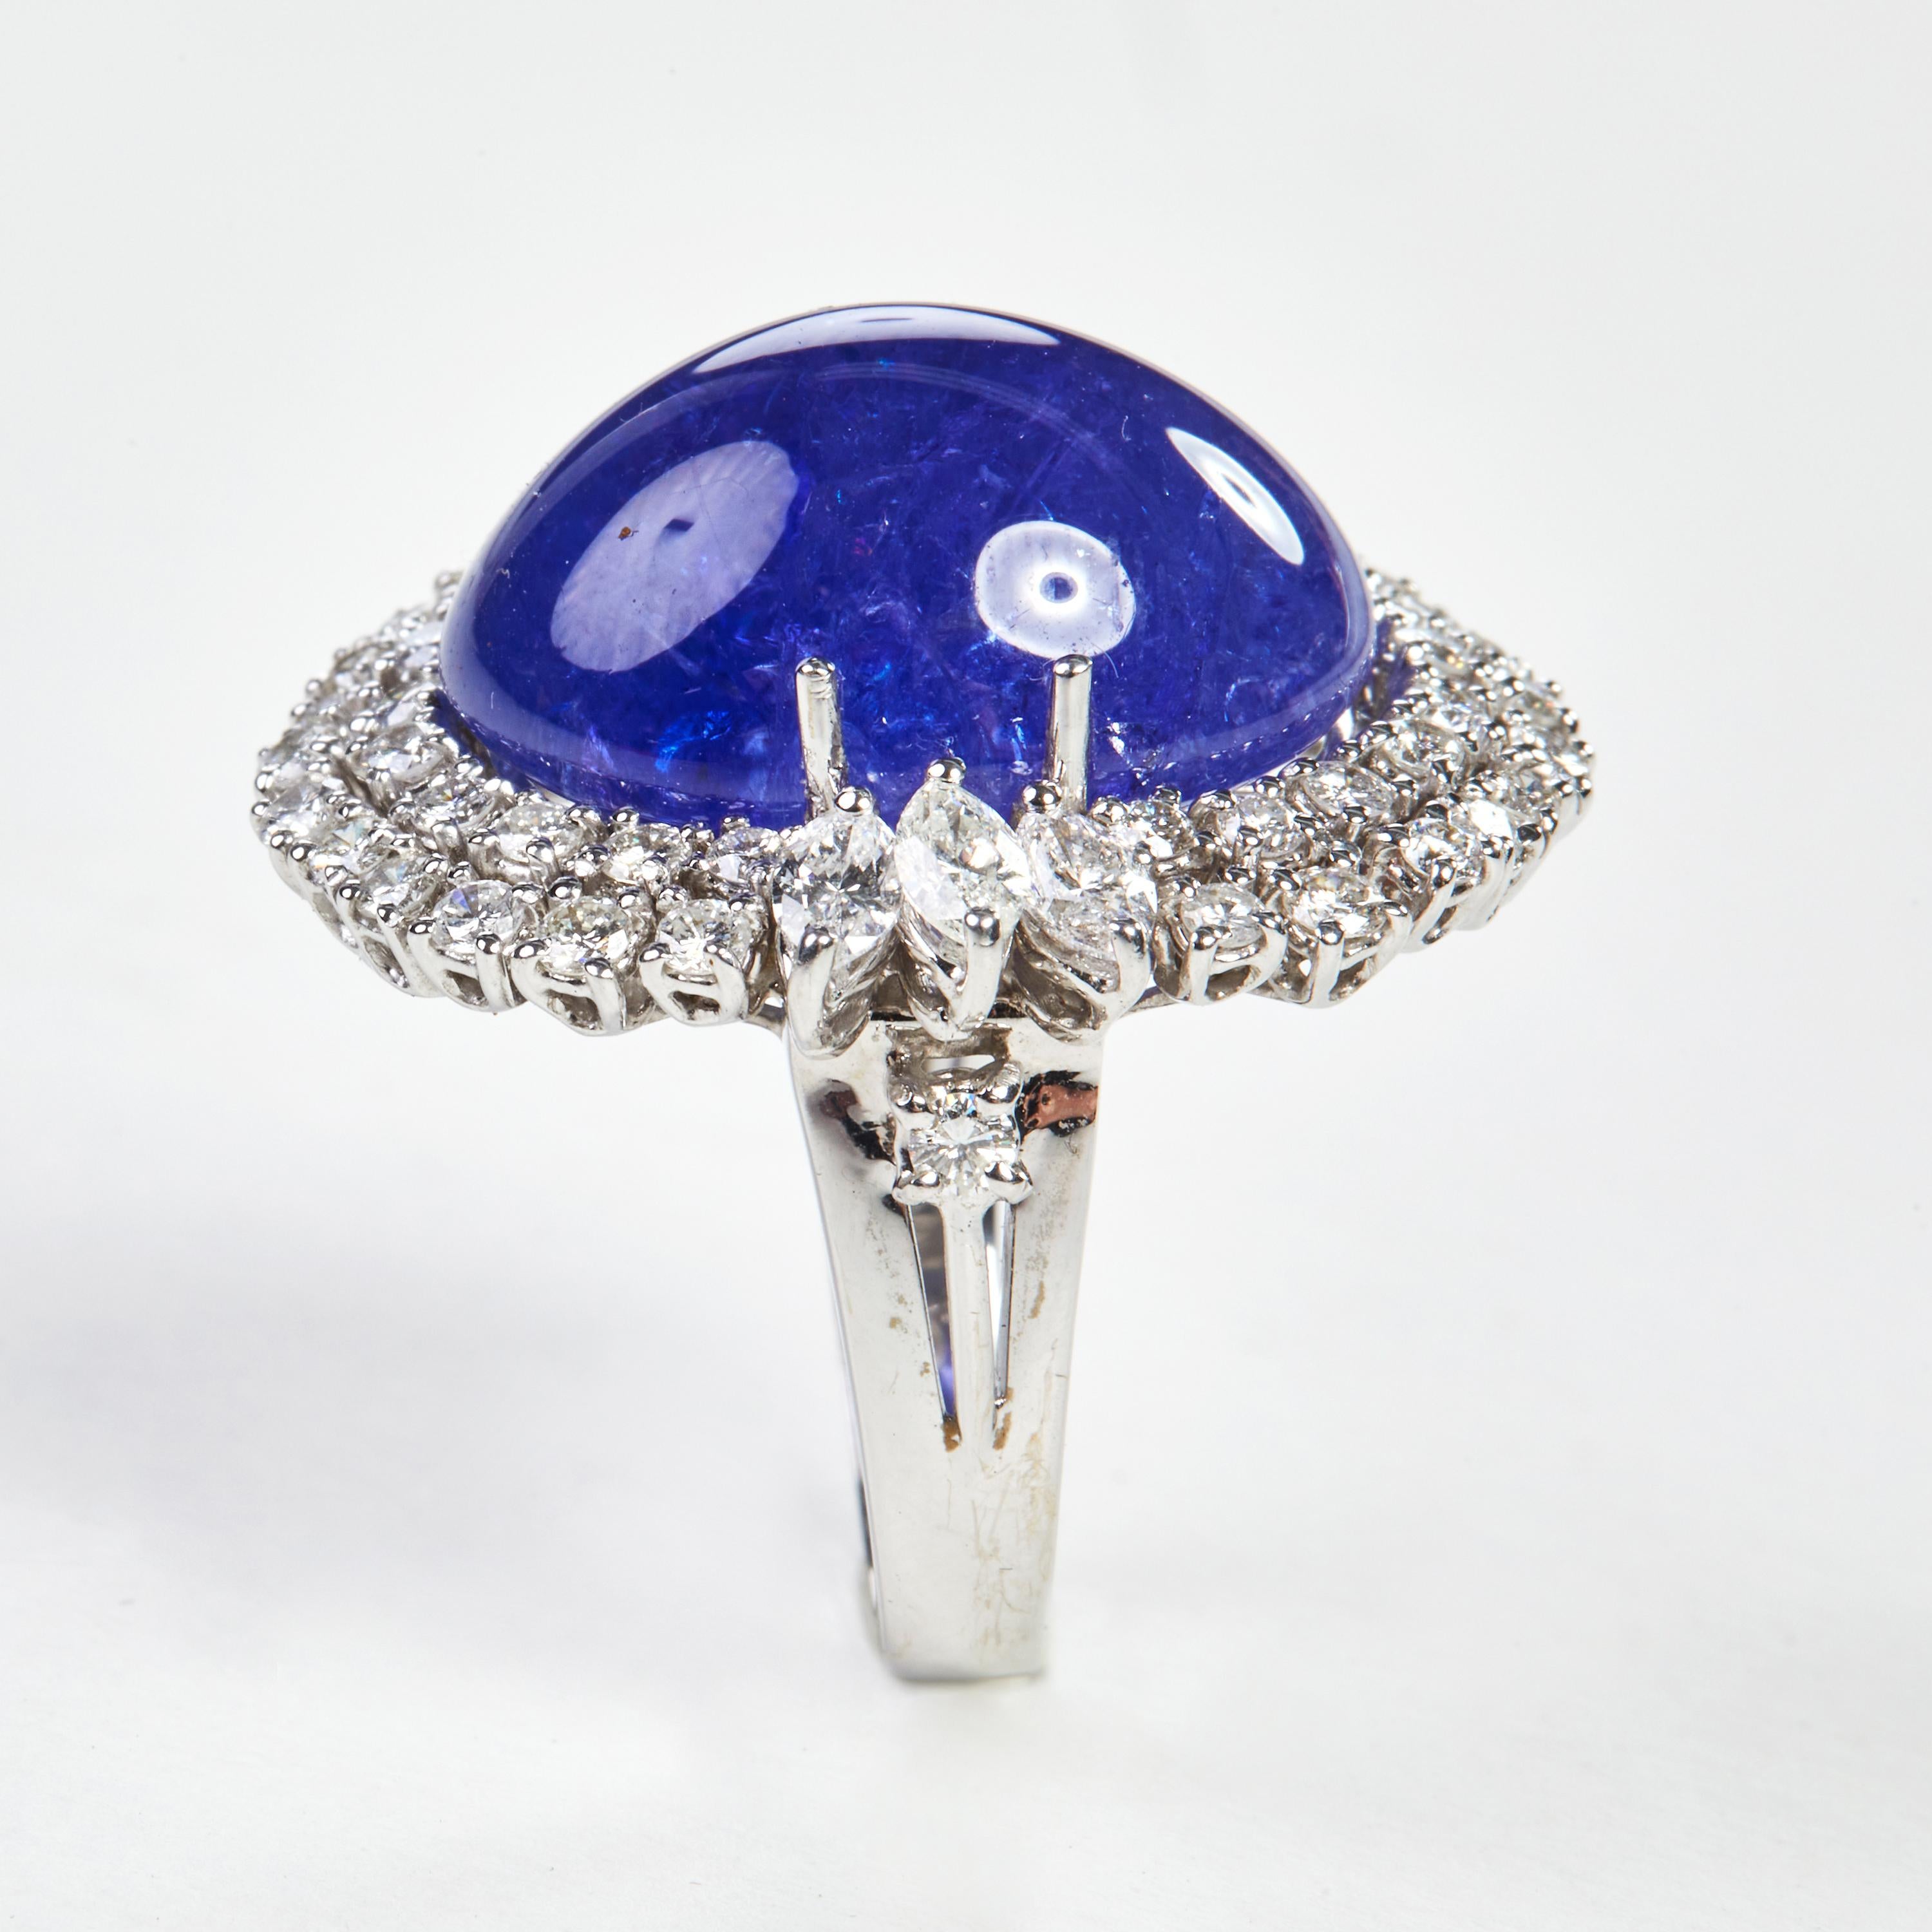 
Beautiful 18 Karat white gold cocktail ring with a stunning 26.27 carat tanzanite center stone. This ring combines classical with modern elements and can be worn every day! 

46  Diamonds 1.27 carat
6 Diamant marq. 0.88 carat
1 Tansanite cab. 26.27